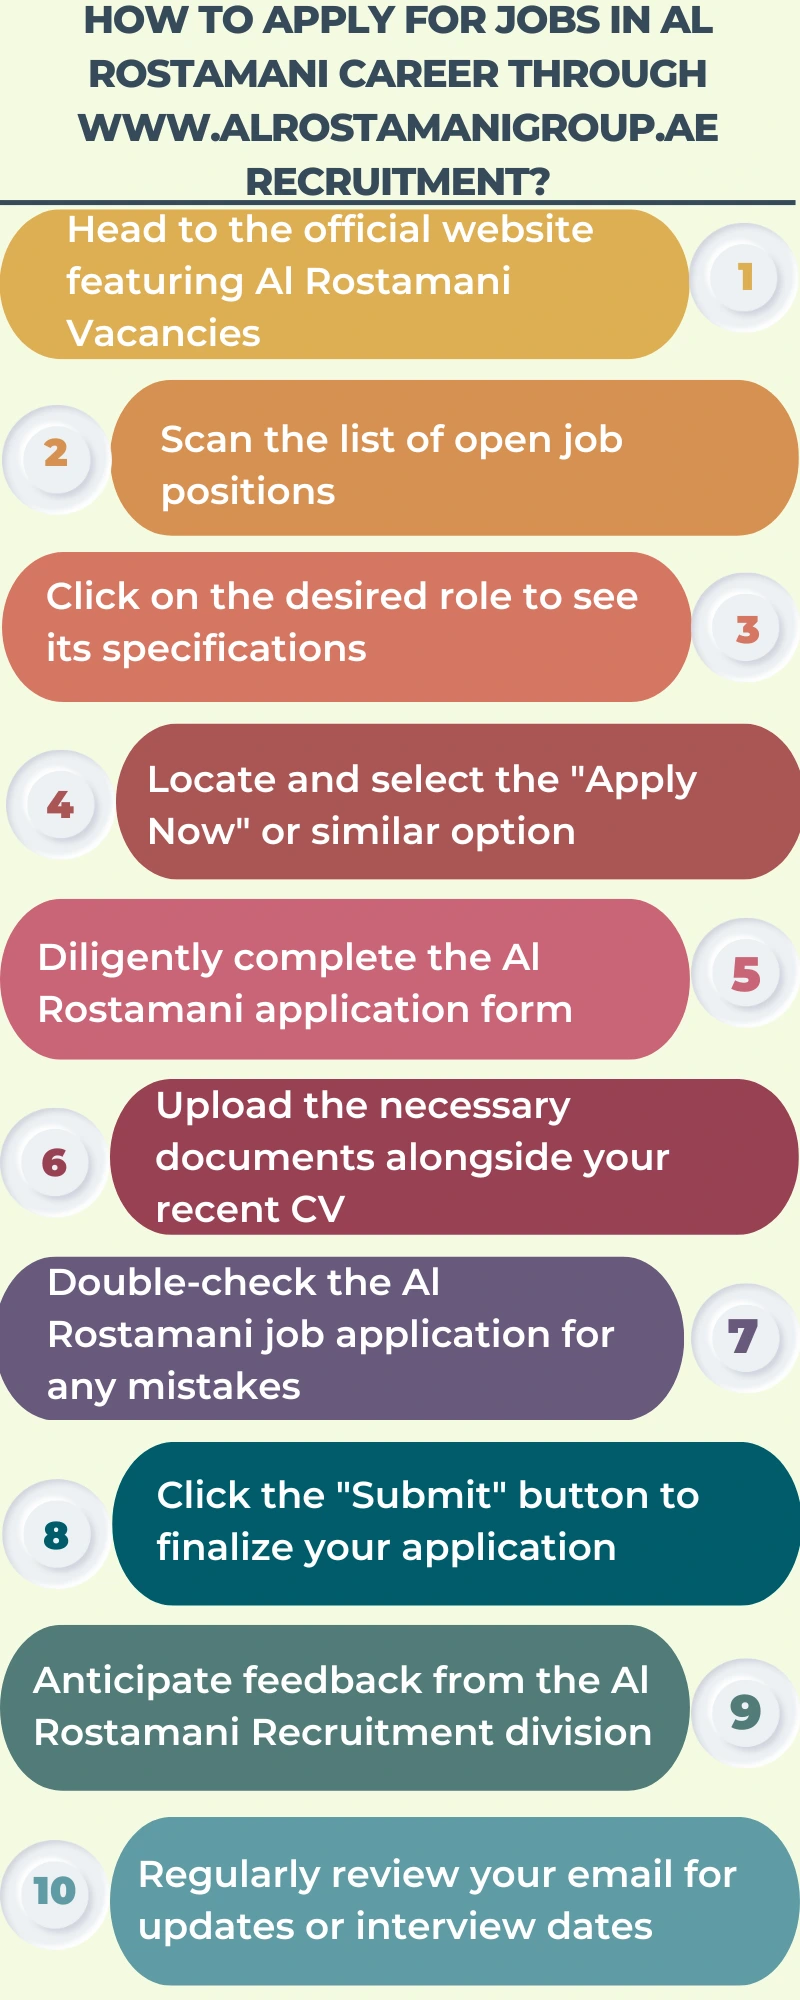 How to Apply for Jobs in Al Rostamani Career through www.alrostamanigroup.ae recruitment?